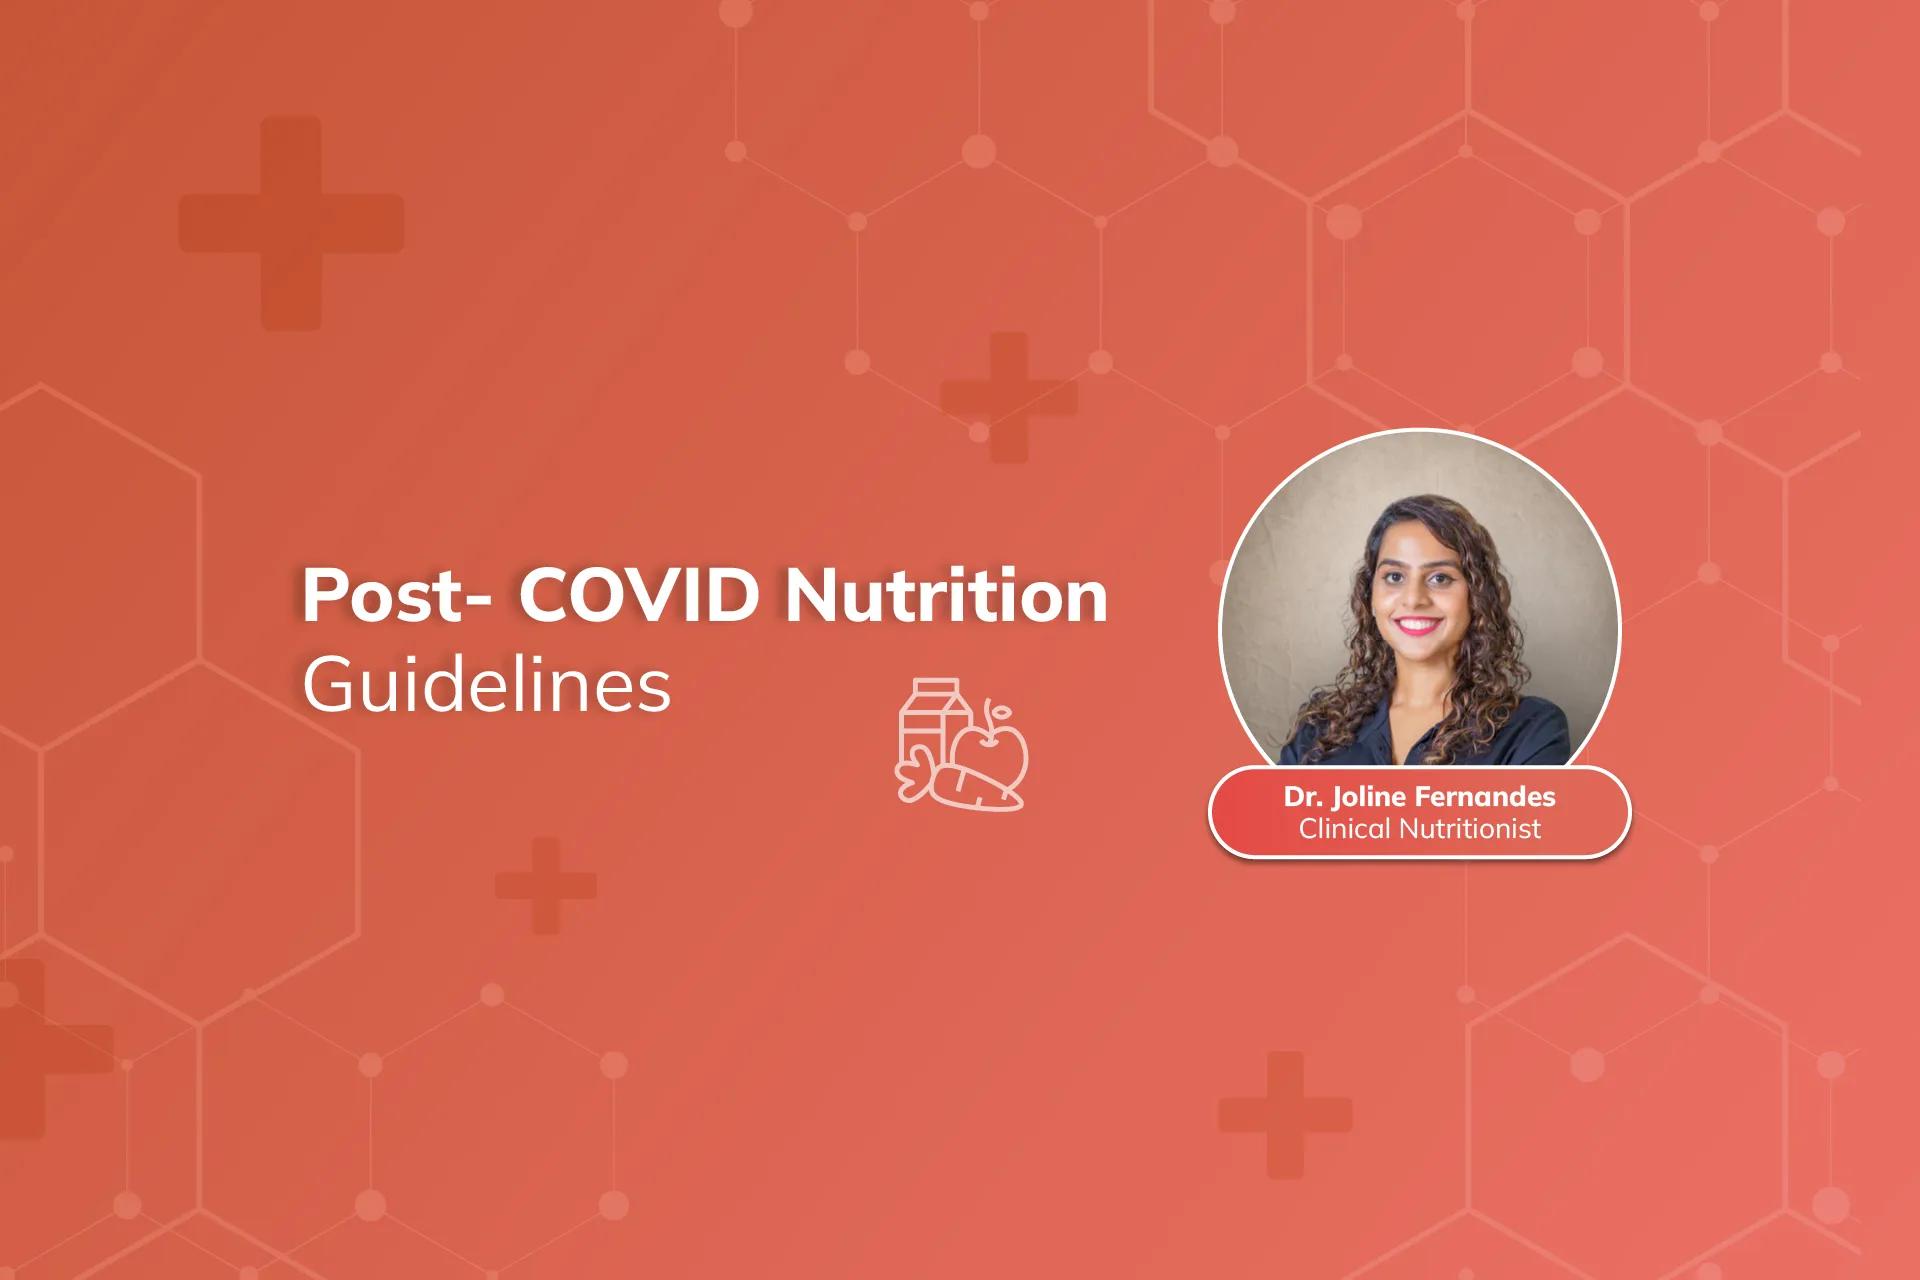 A Guide to Post-COVID Nutrition by Dr. Joline Fernandes